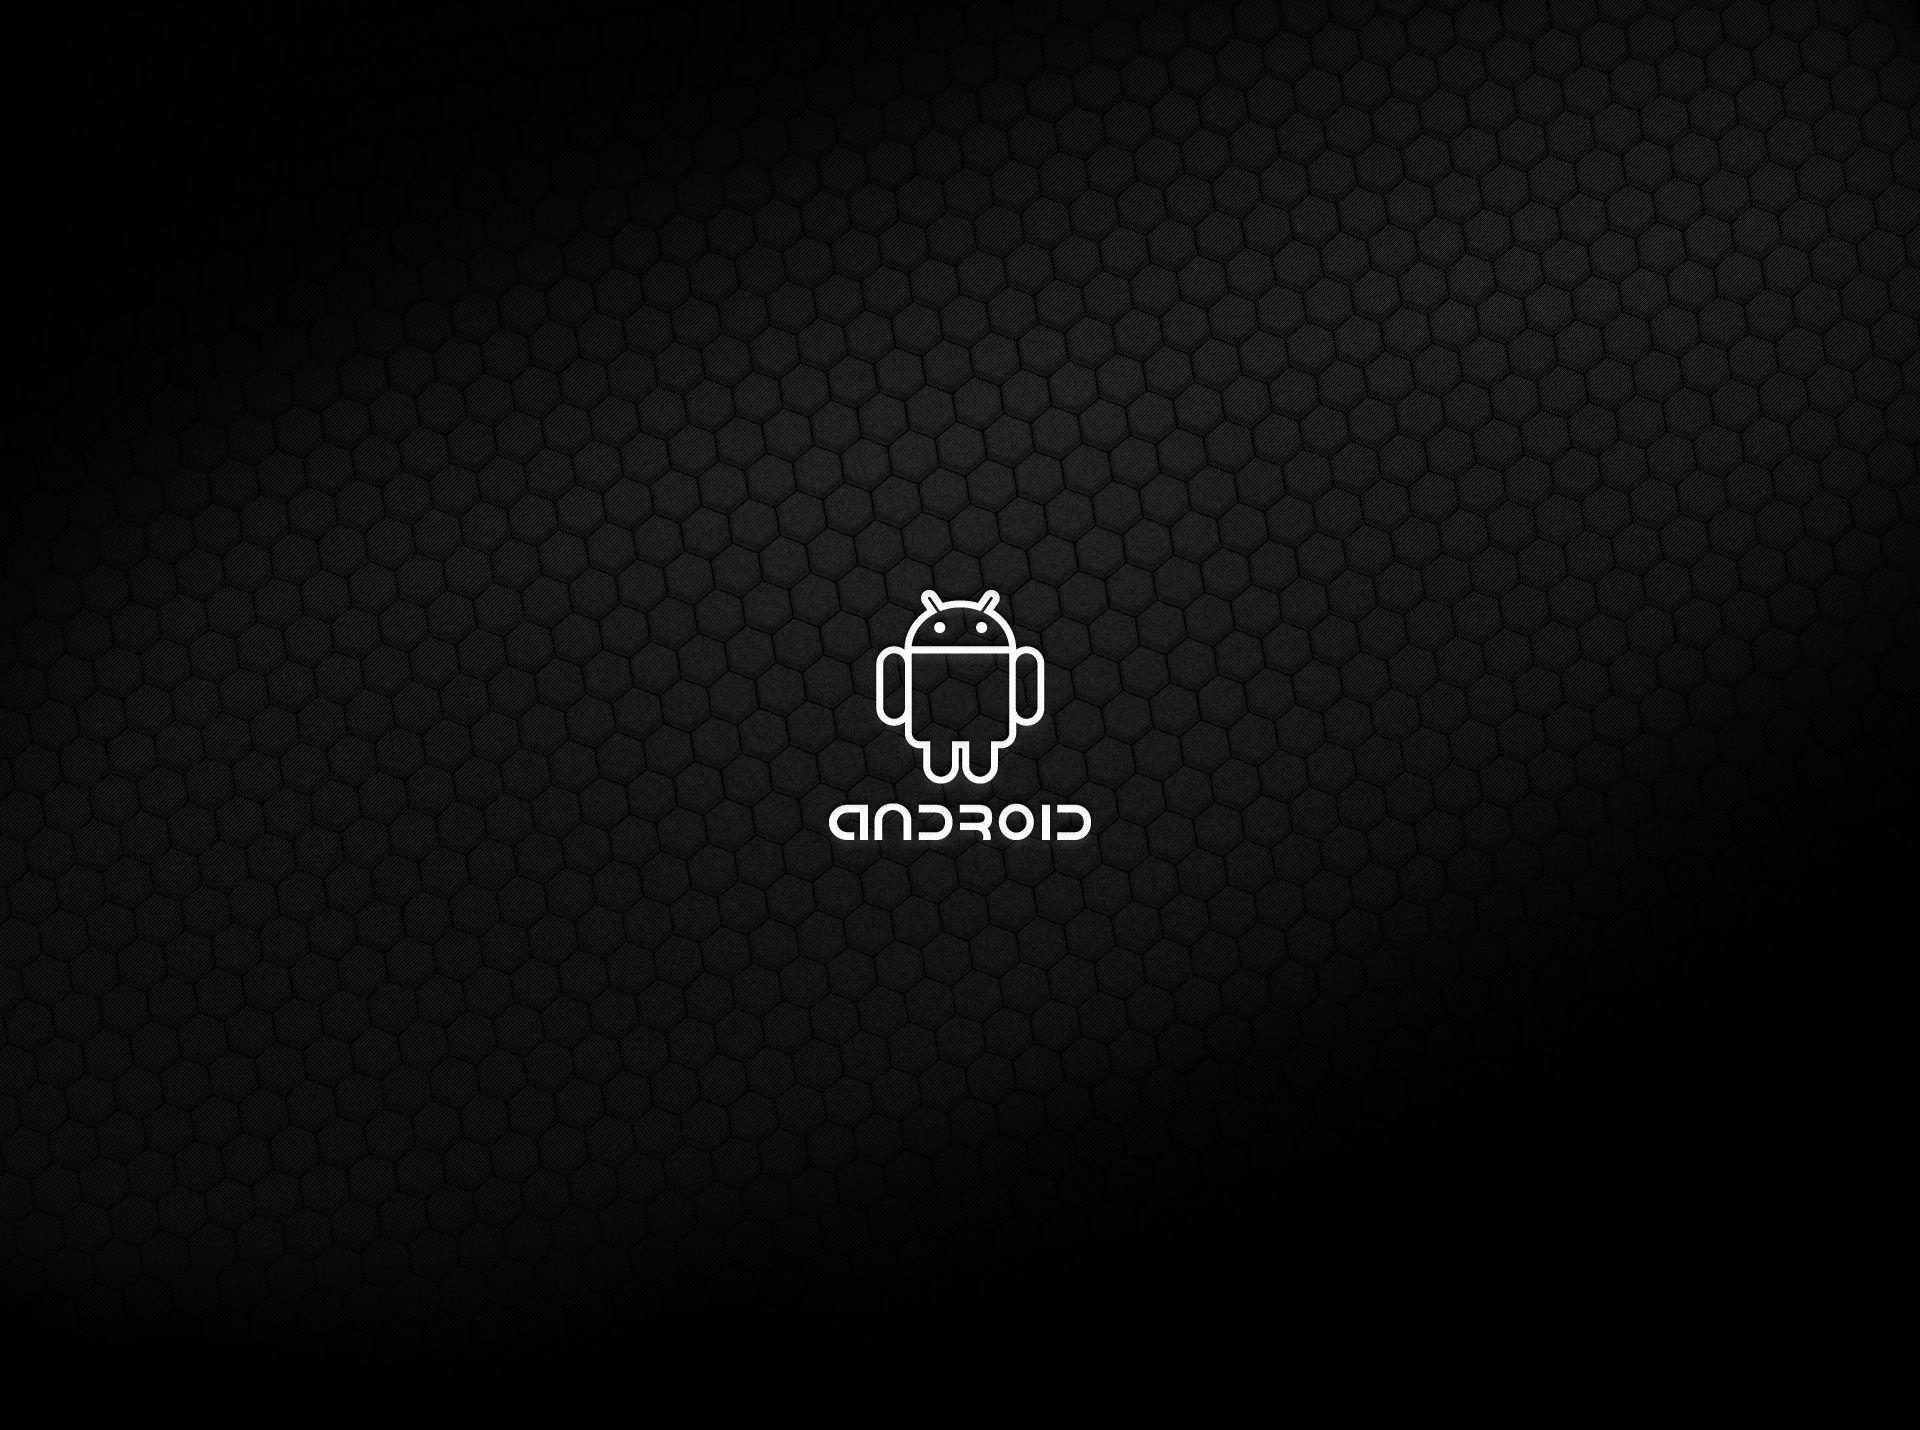 Android Logo Wallpaper HD Image Download. teste